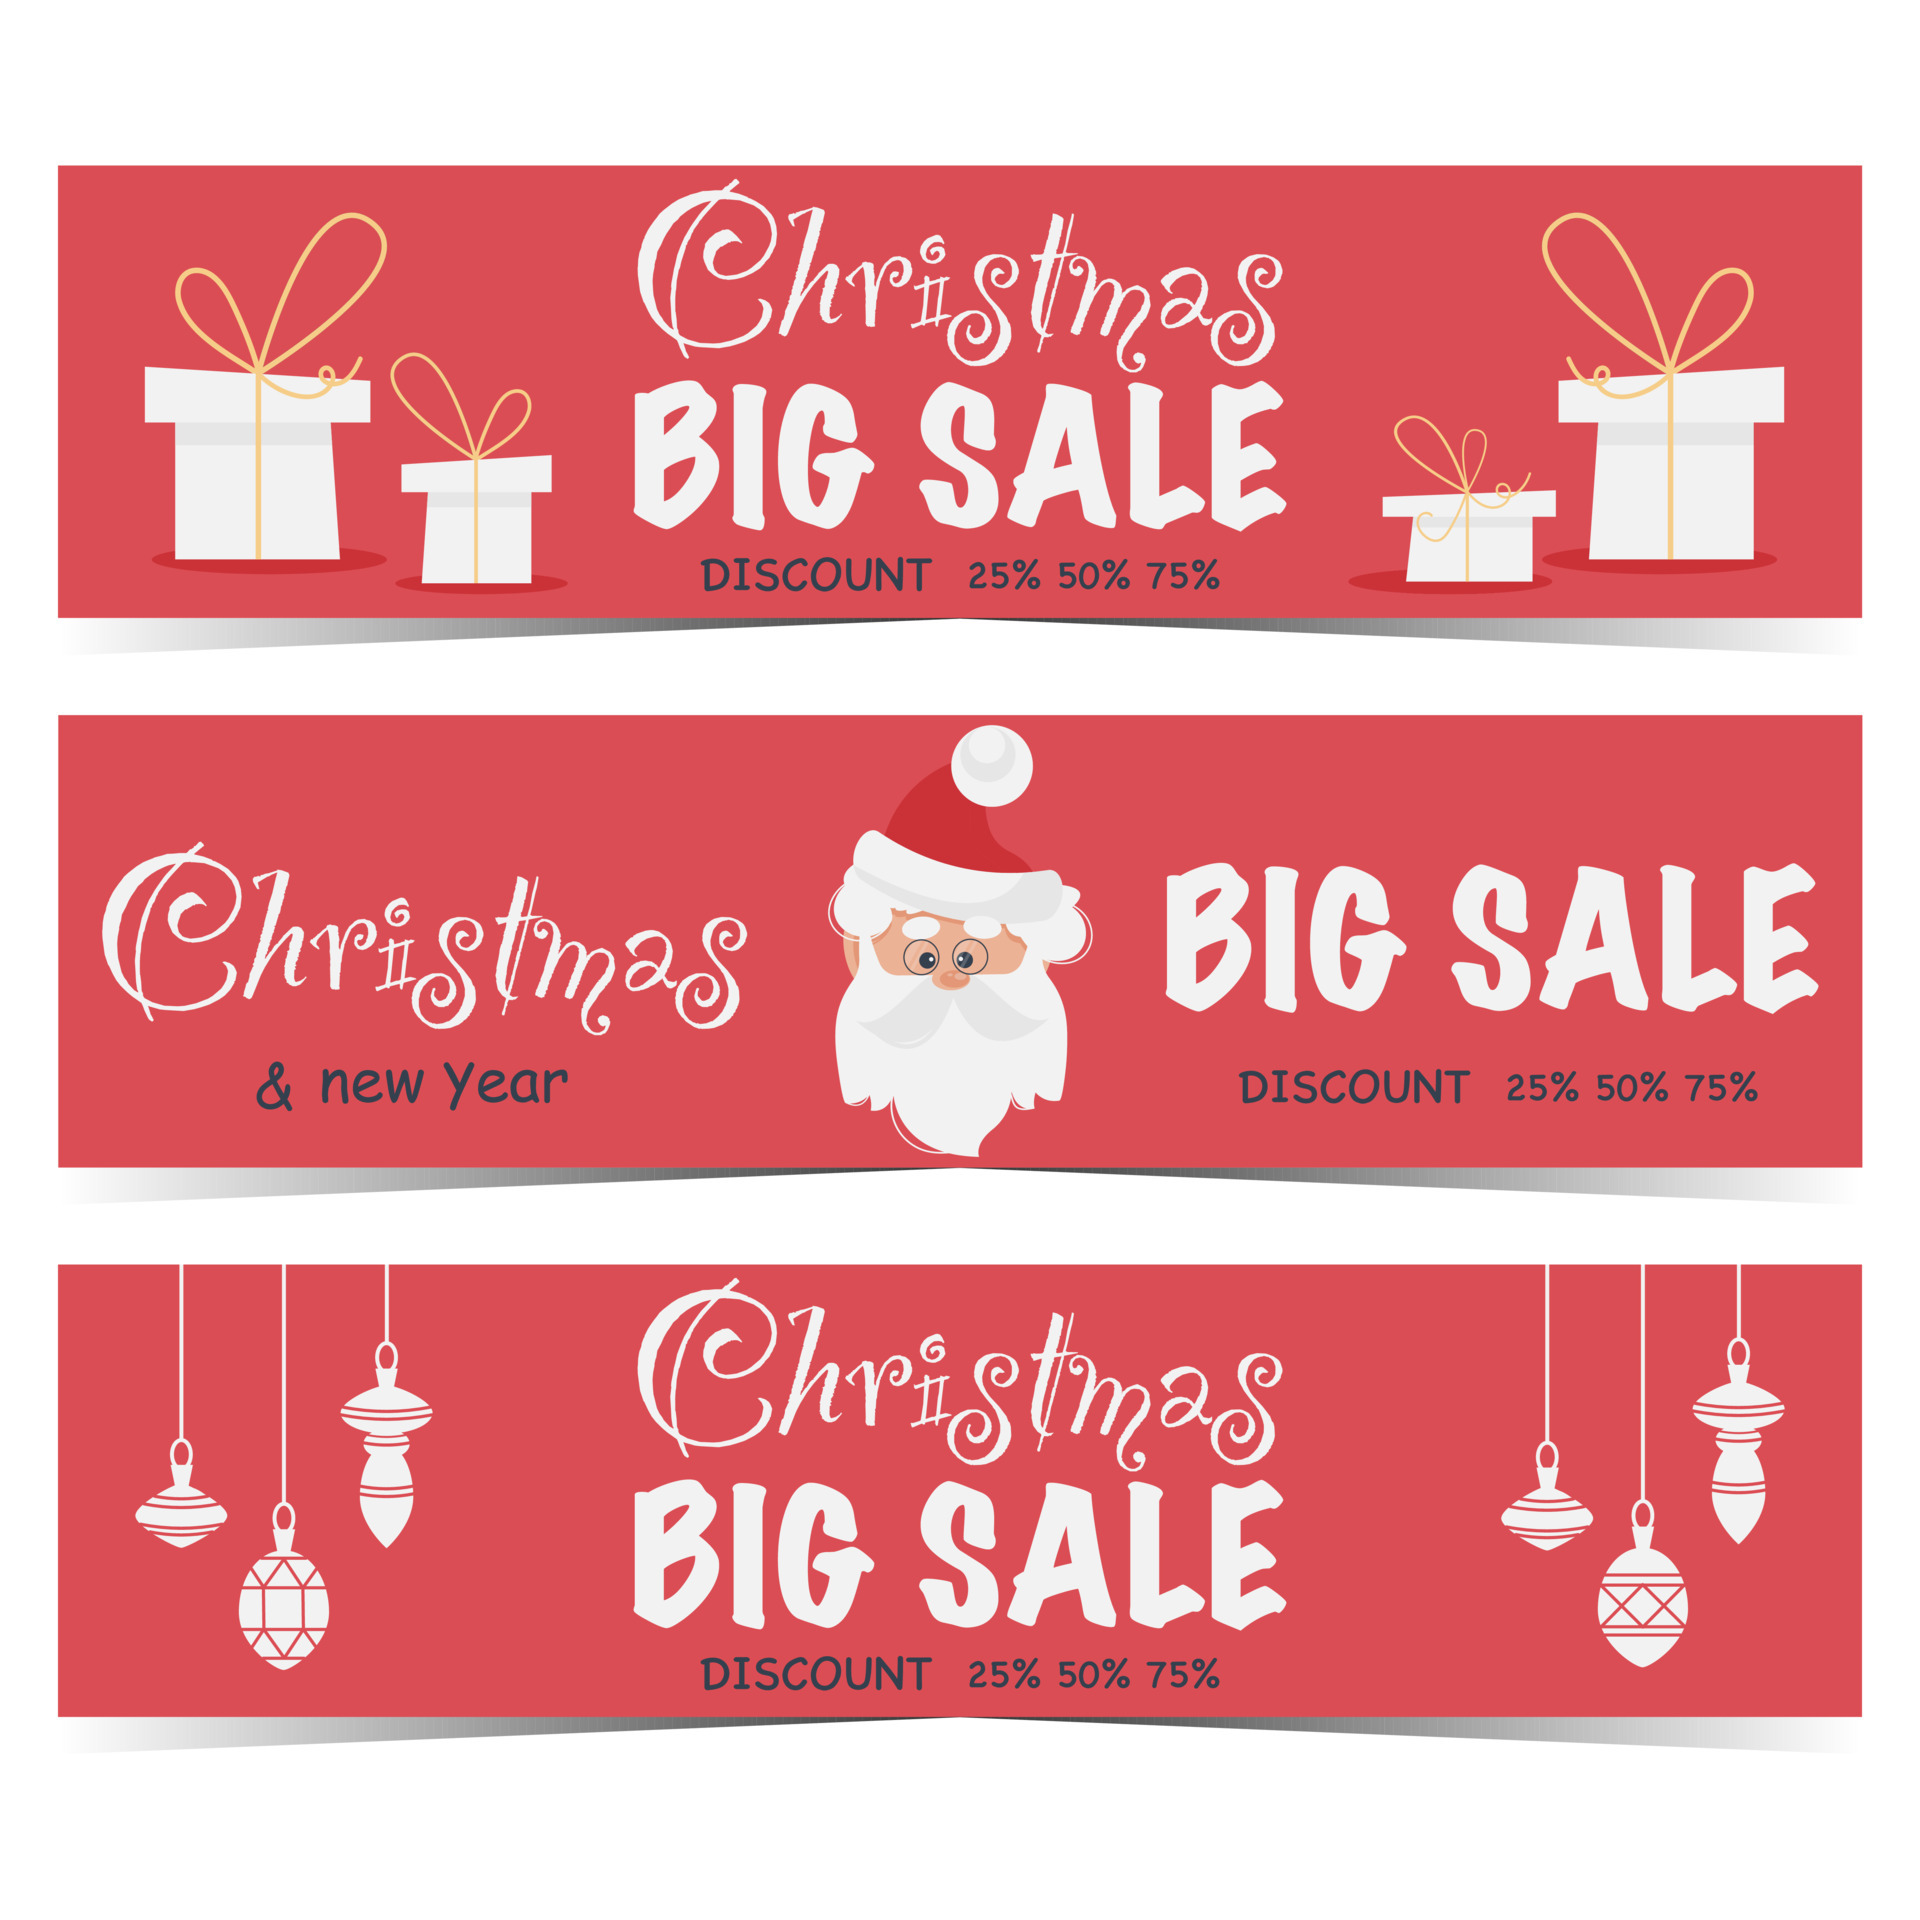 Prime Big Deal Days' Christmas Decorations on Sale